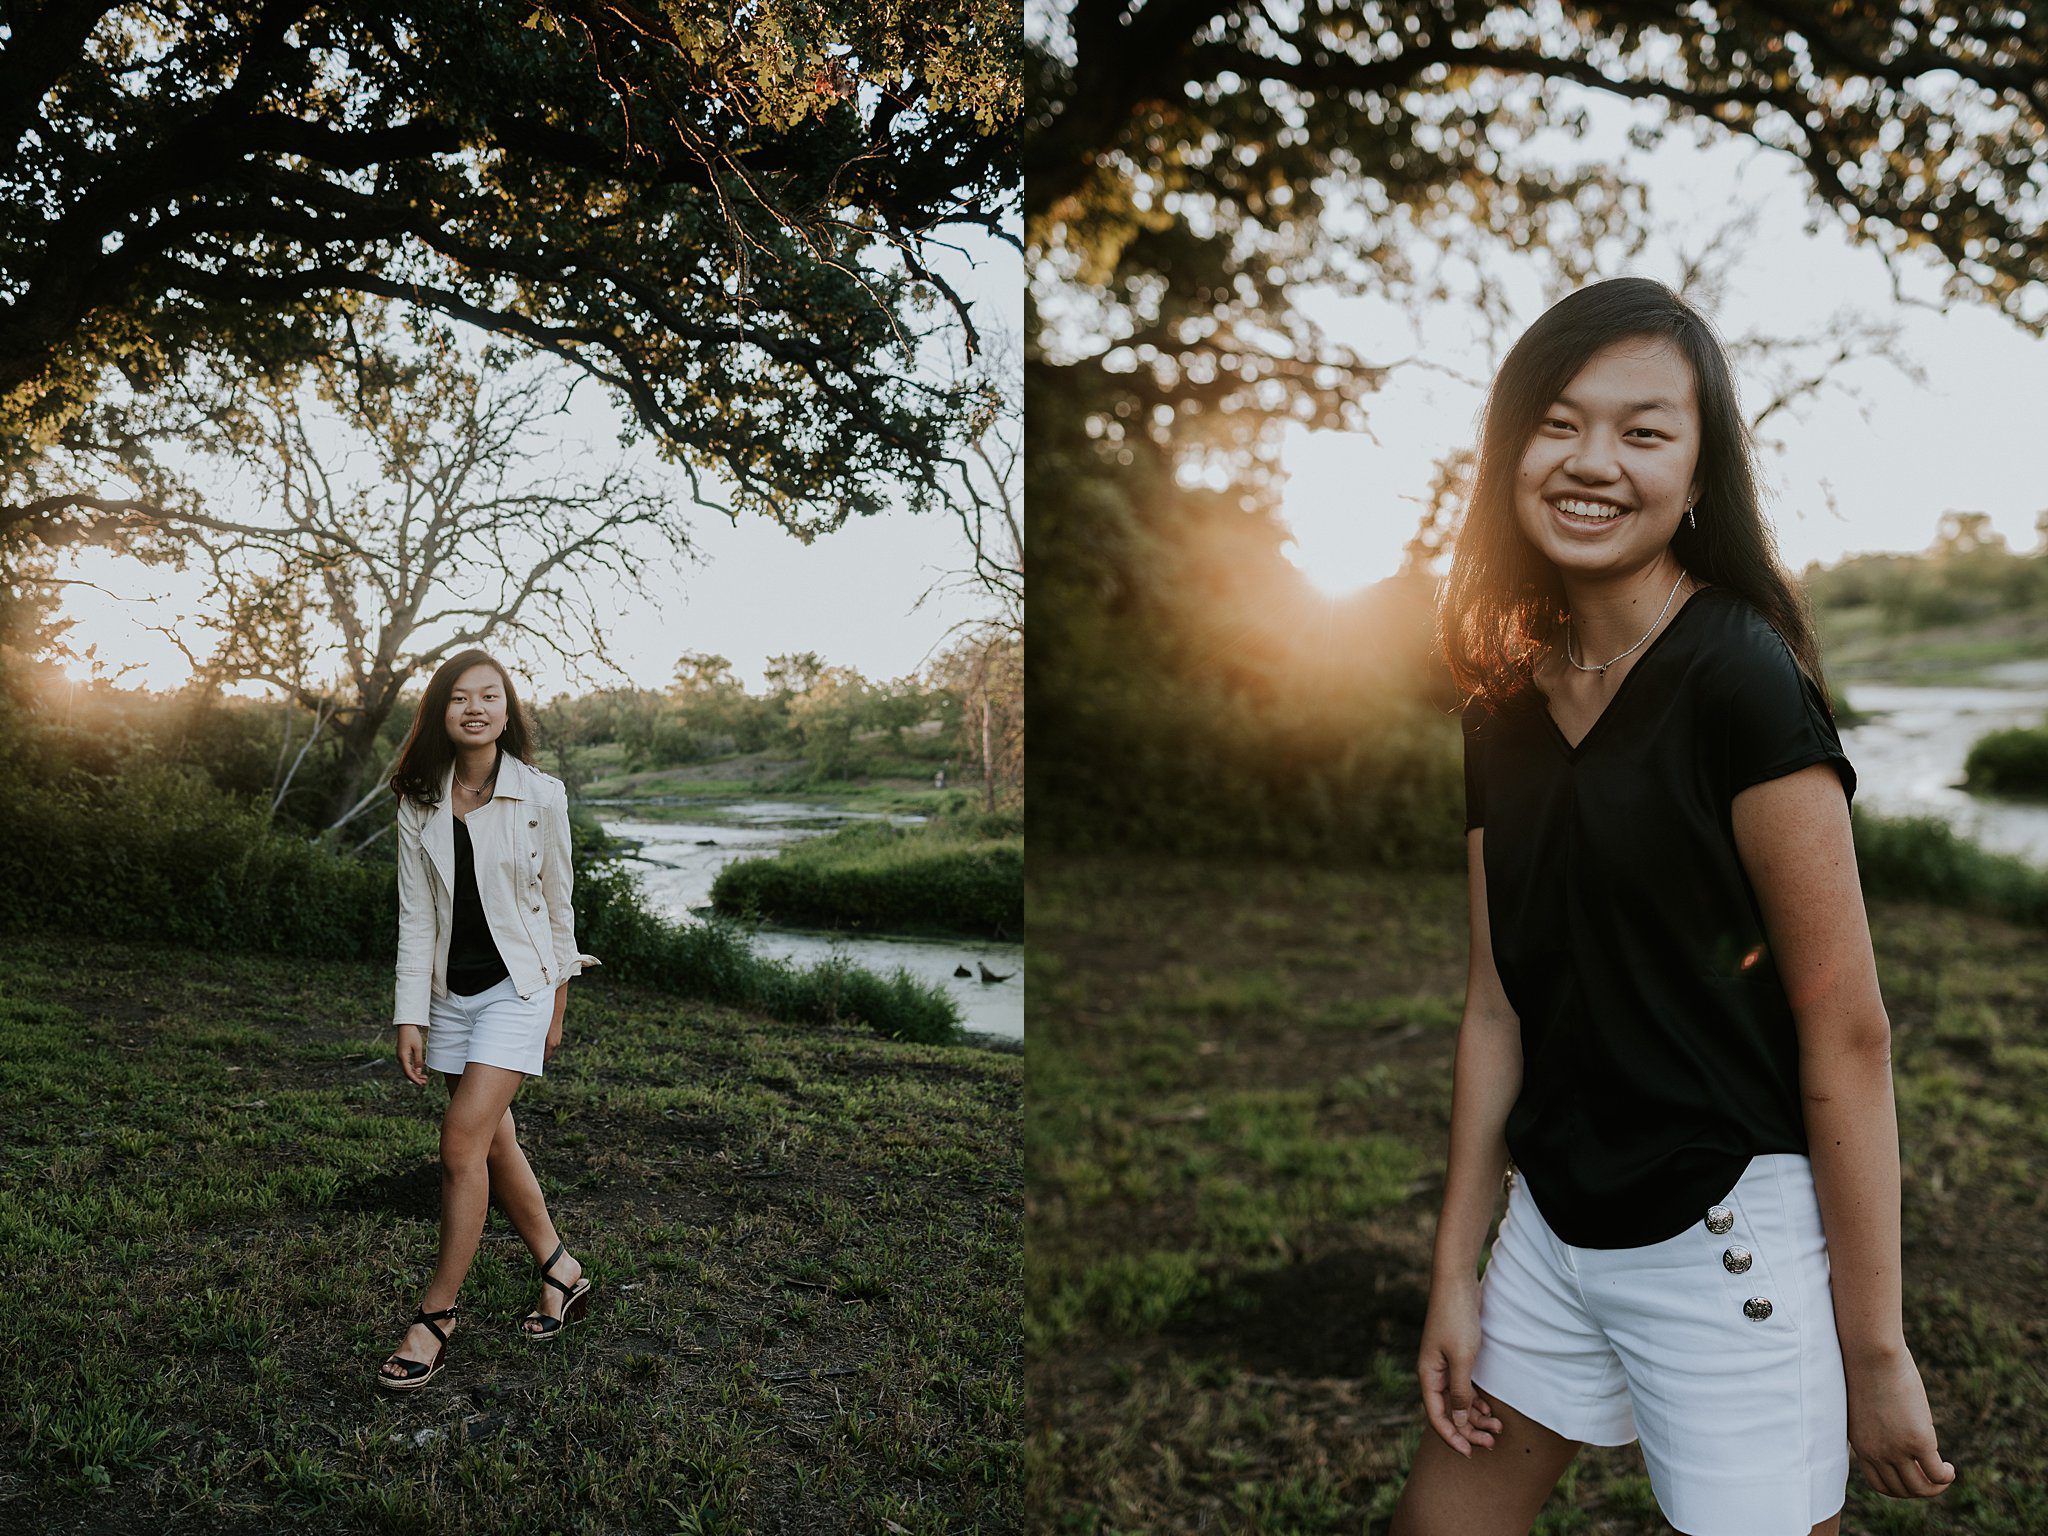 This is a dip-tic of two images, the photo on the left is a girl walking in a white jacket, black shirt, and white shorts. Behind her is a pond and a knobby diamond oak tree. On the right A girl is getting her senior photos taken in Iowa in front of a pond. She has black hair that is glowing from the golden light coming through the tree behind her. 